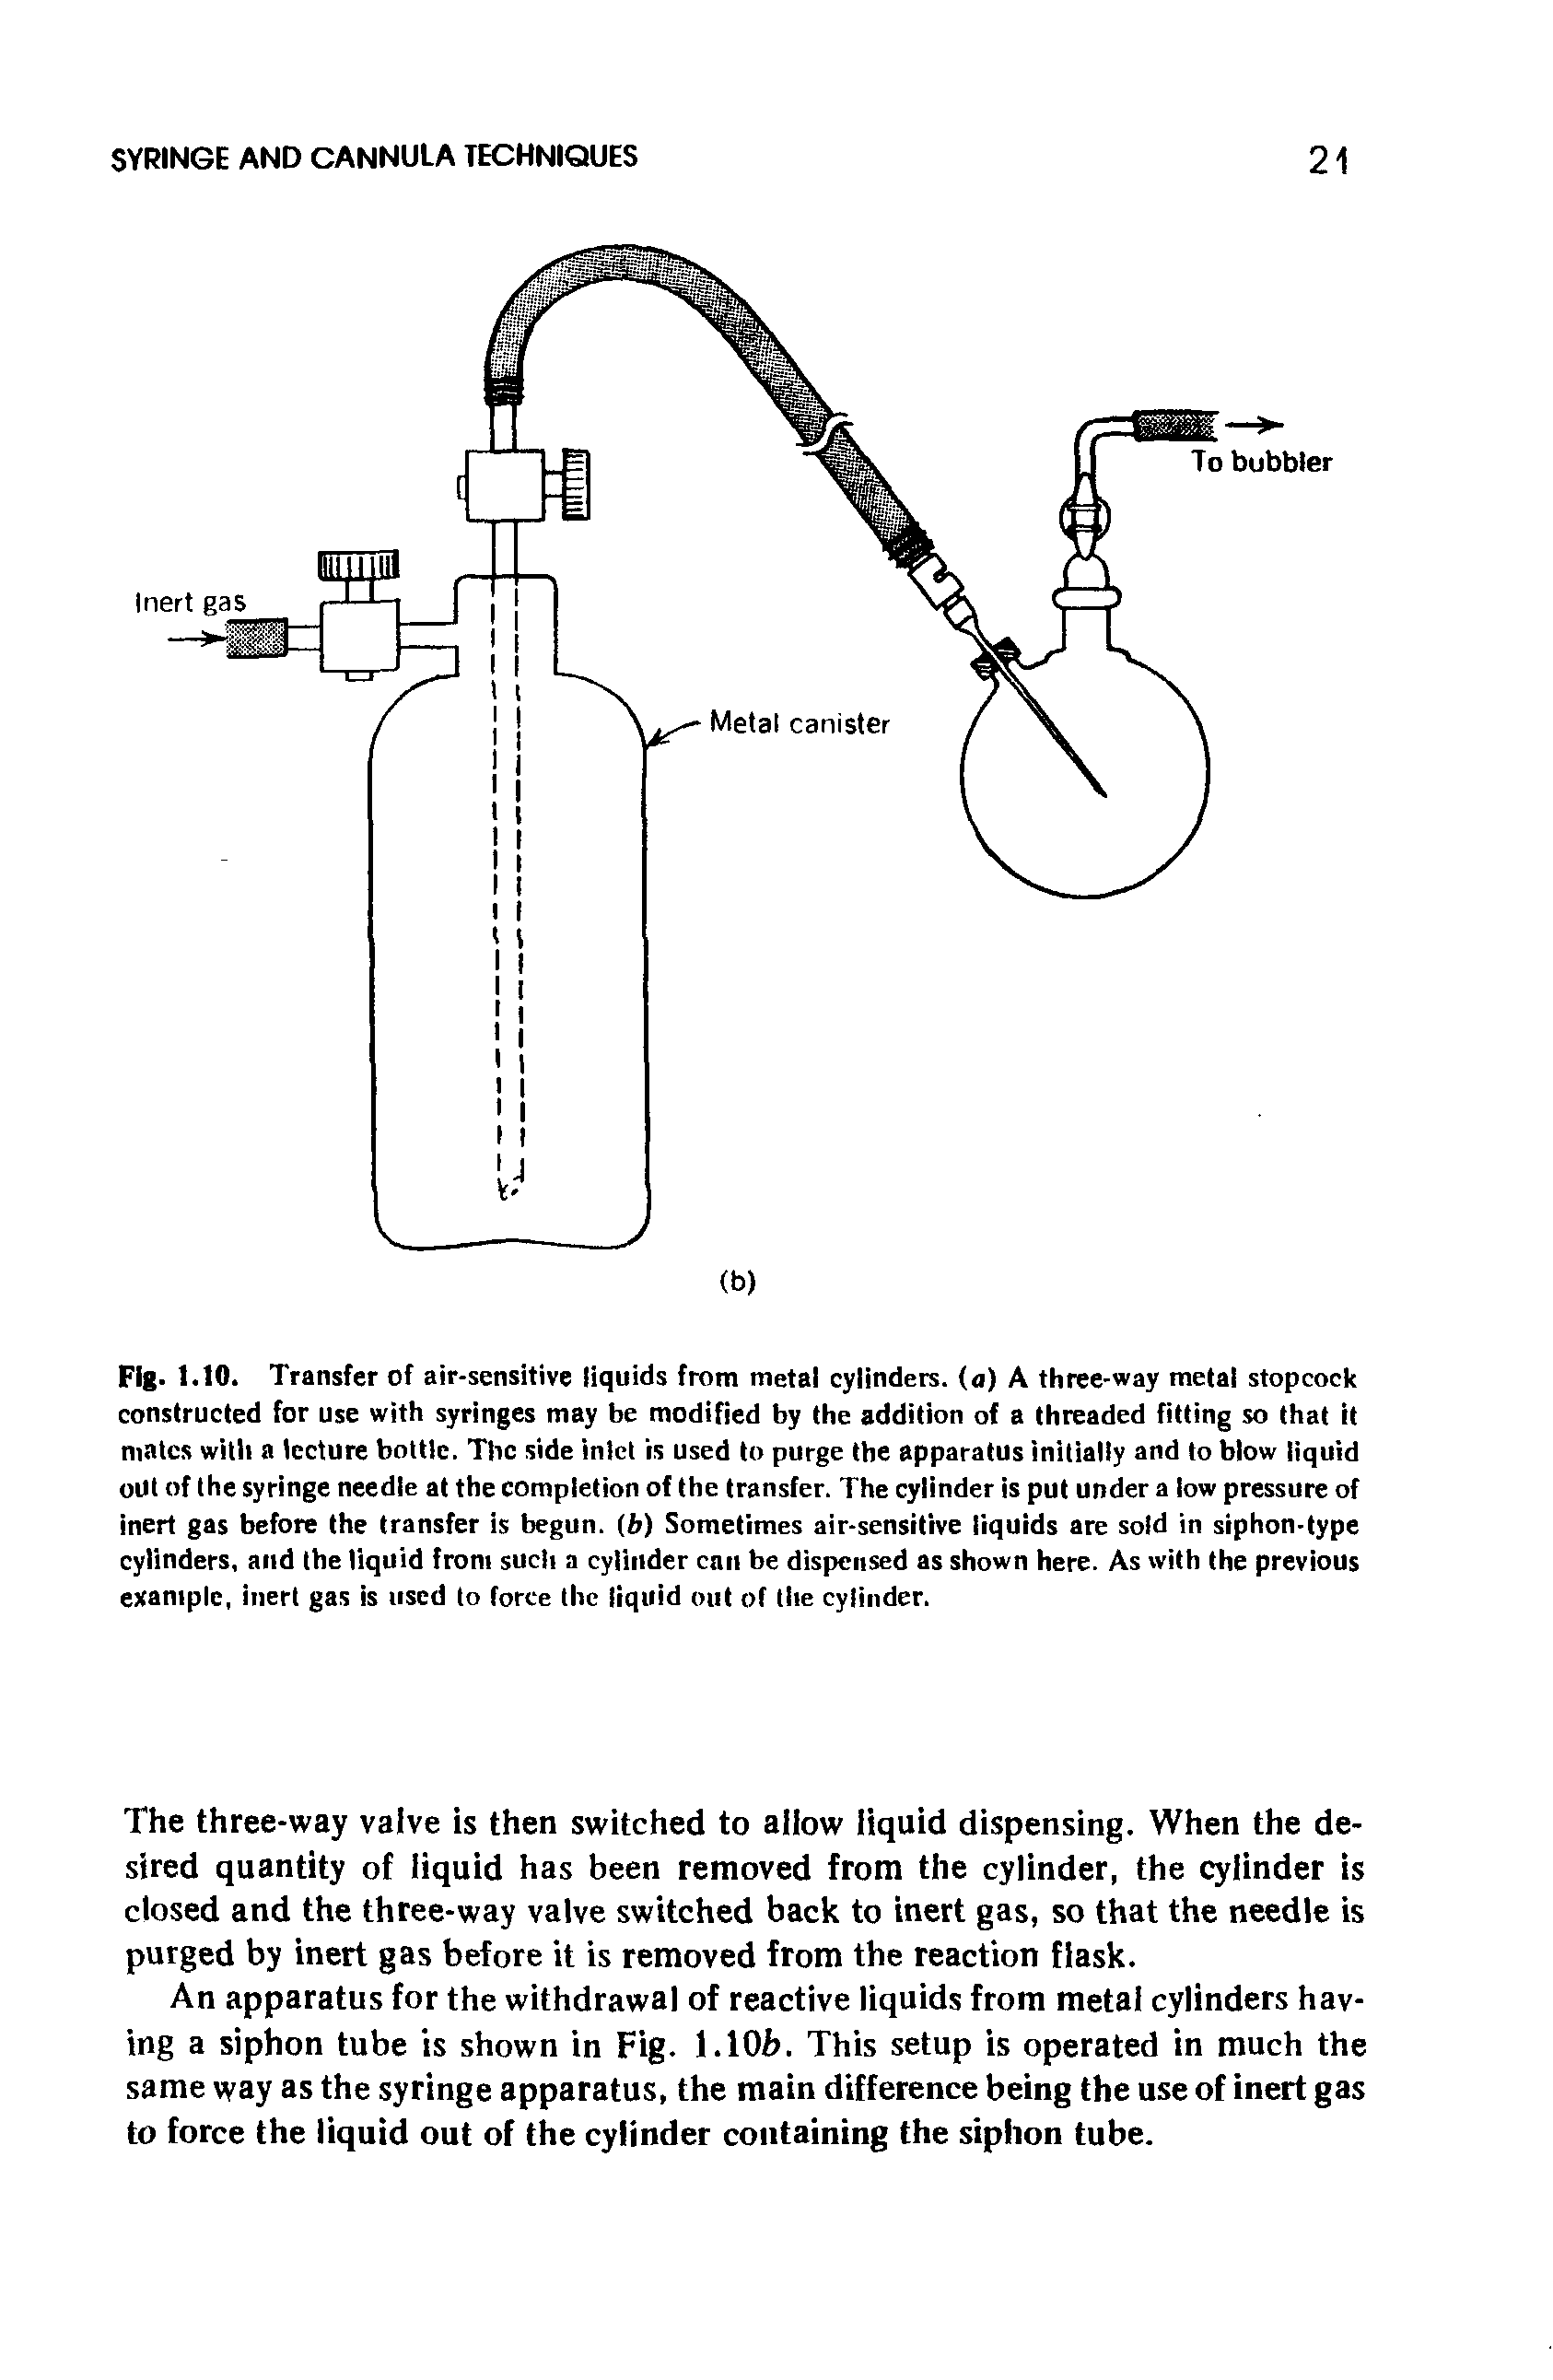 Fig. 1.10. Transfer of air-sensitive liquids from metal cylinders, (a) A three-way metal stopcock constructed for use with syringes may be modified by the addition of a threaded fitting so that it mates with a lecture bottle. The side inlet is used to purge the apparatus initially and to blow liquid out of the syringe needle at the completion of the transfer. The cylinder is put under a low pressure of inert gas before the transfer is begun, (b) Sometimes air-sensitive liquids are sold in siphon-type cylinders, and the liquid from such a cylinder can be dispensed as shown here. As with the previous example, inert gas is used to force the liquid out of the cylinder.